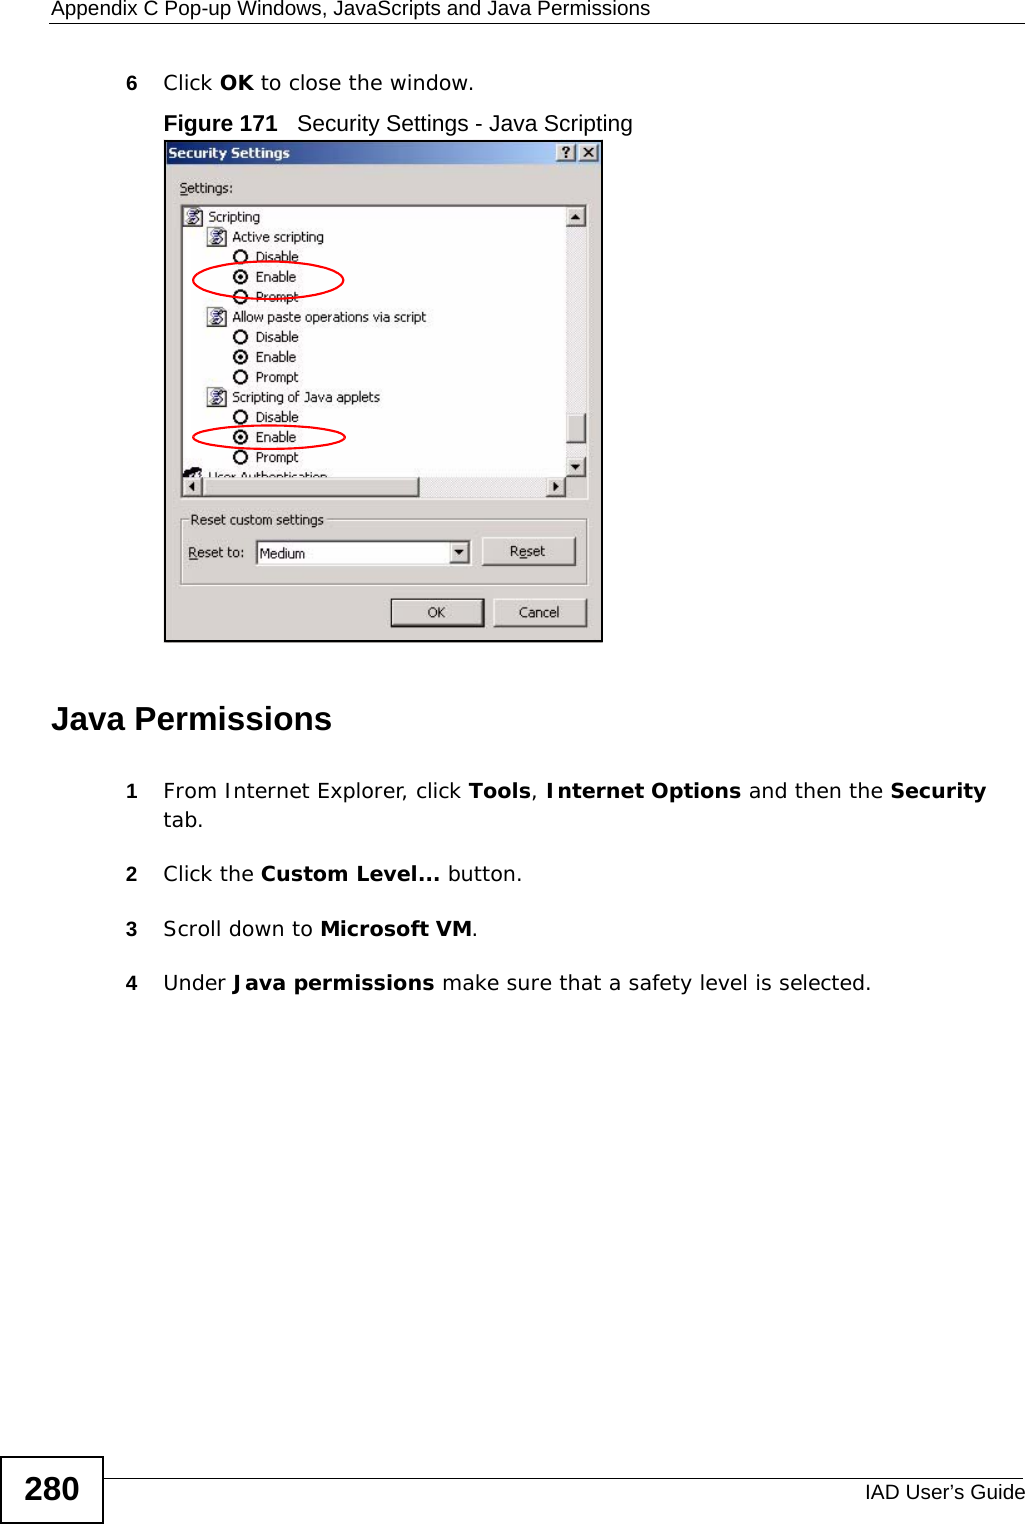 Appendix C Pop-up Windows, JavaScripts and Java PermissionsIAD User’s Guide2806Click OK to close the window.Figure 171   Security Settings - Java ScriptingJava Permissions1From Internet Explorer, click Tools, Internet Options and then the Security tab. 2Click the Custom Level... button. 3Scroll down to Microsoft VM. 4Under Java permissions make sure that a safety level is selected.